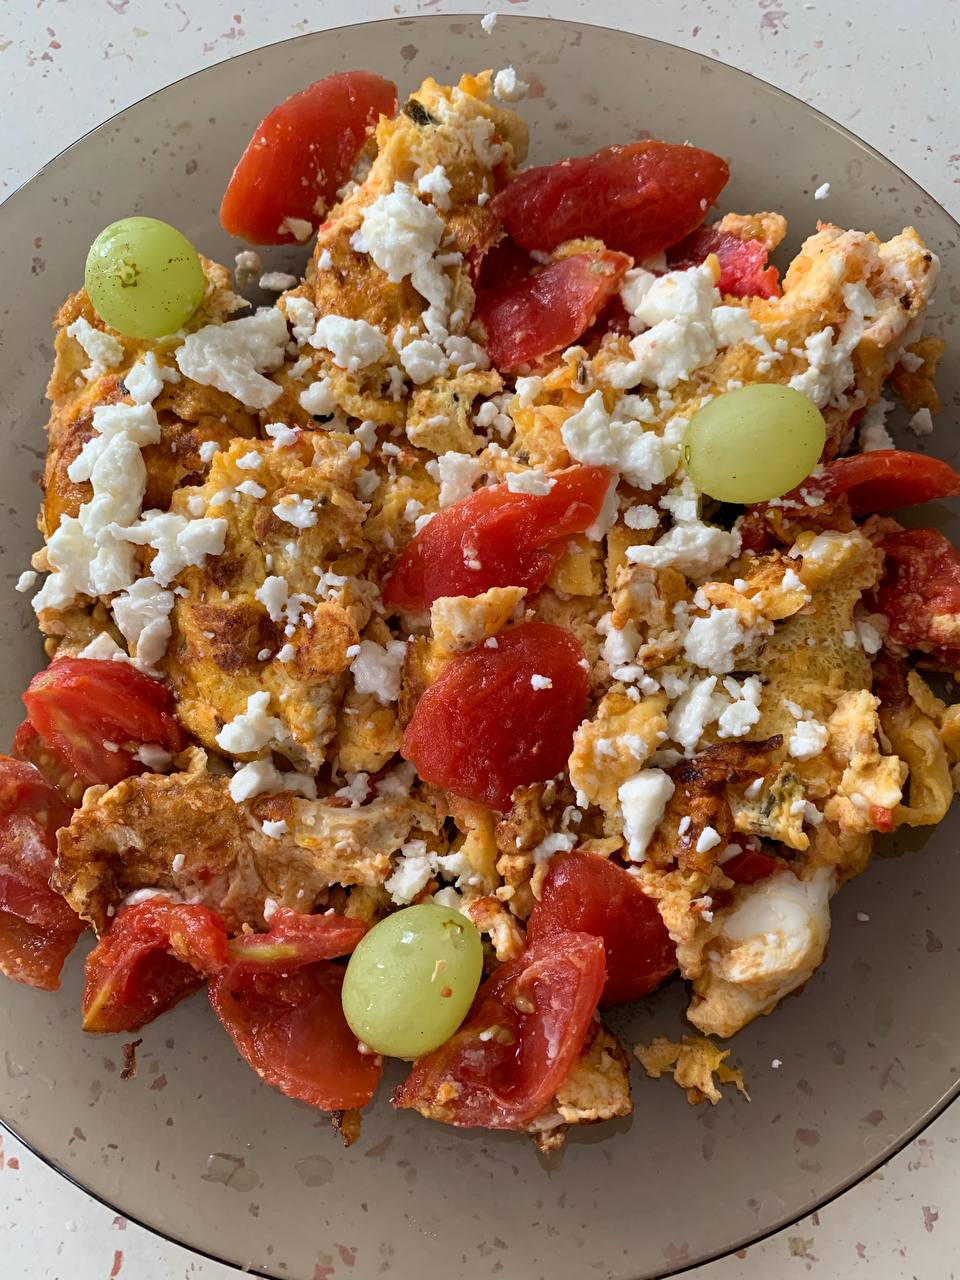 Scrambled Eggs With Tomato, Crumbled Cheese, And Olives